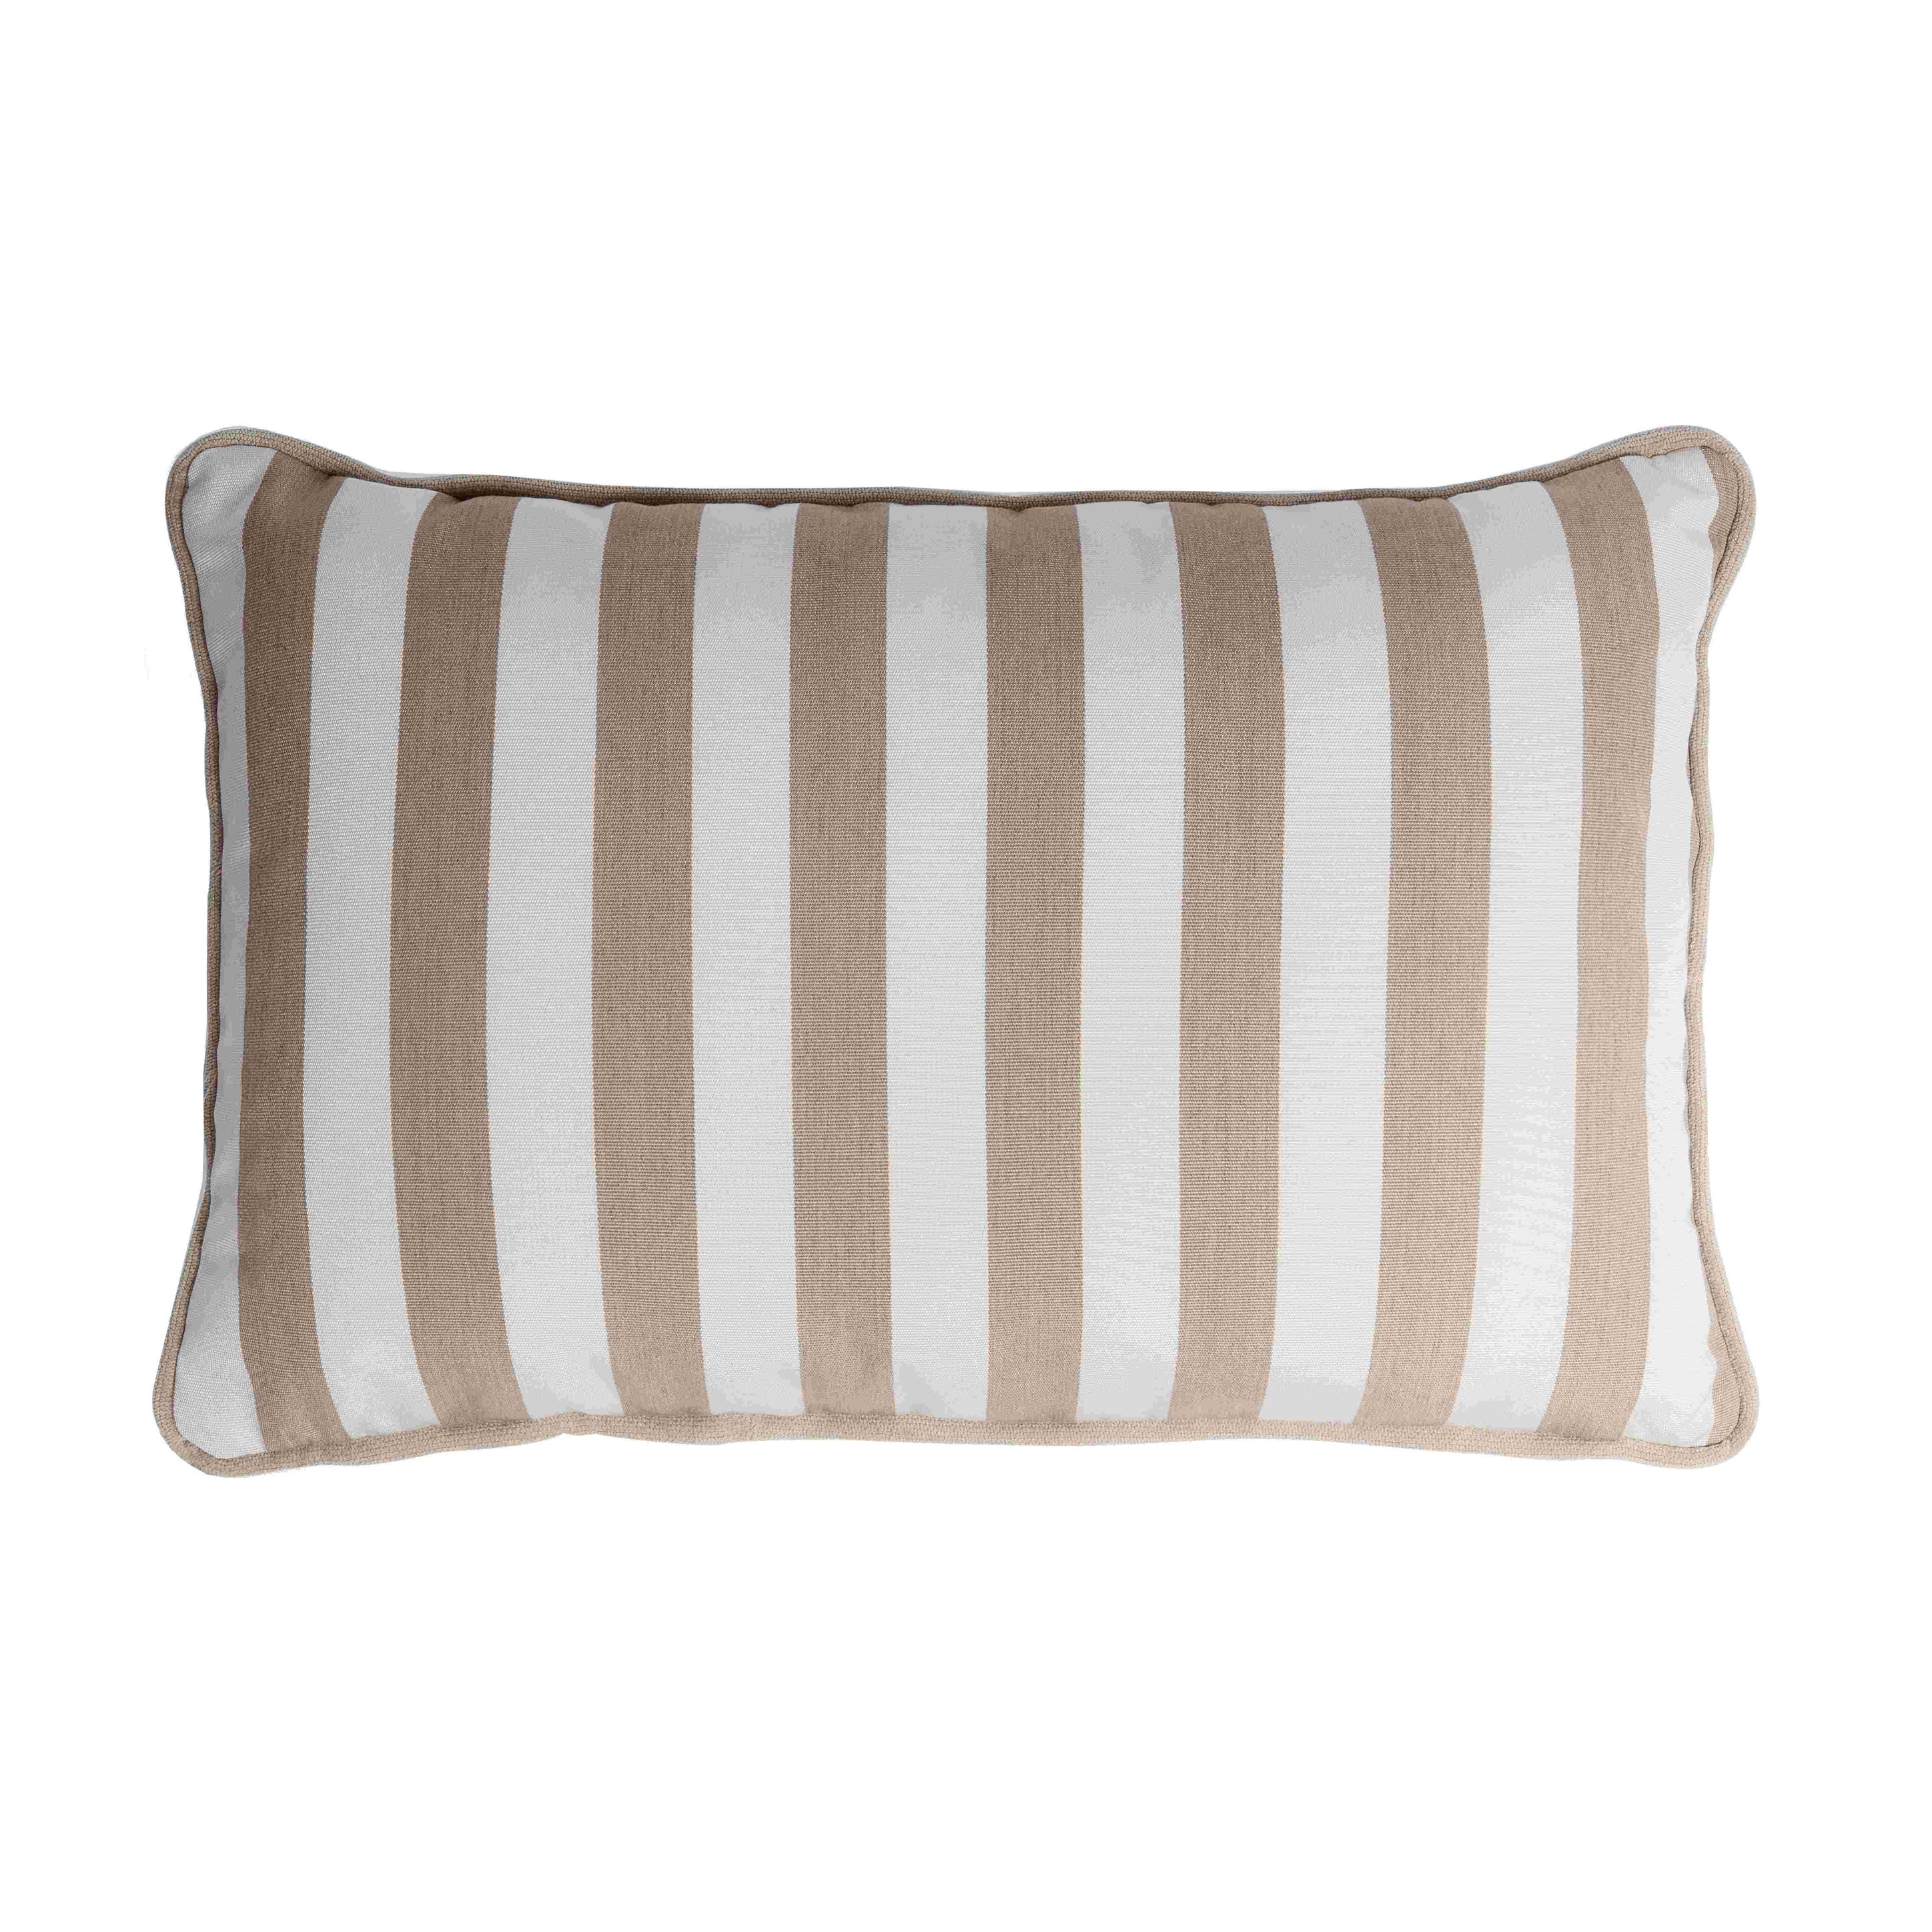 OutdoorIndoorCoupleStripedCushionsWithFringes-PipingBeigedetail2LS_5ee7d5d9-c8ae-408c-8420-f2c83a455527.jpg